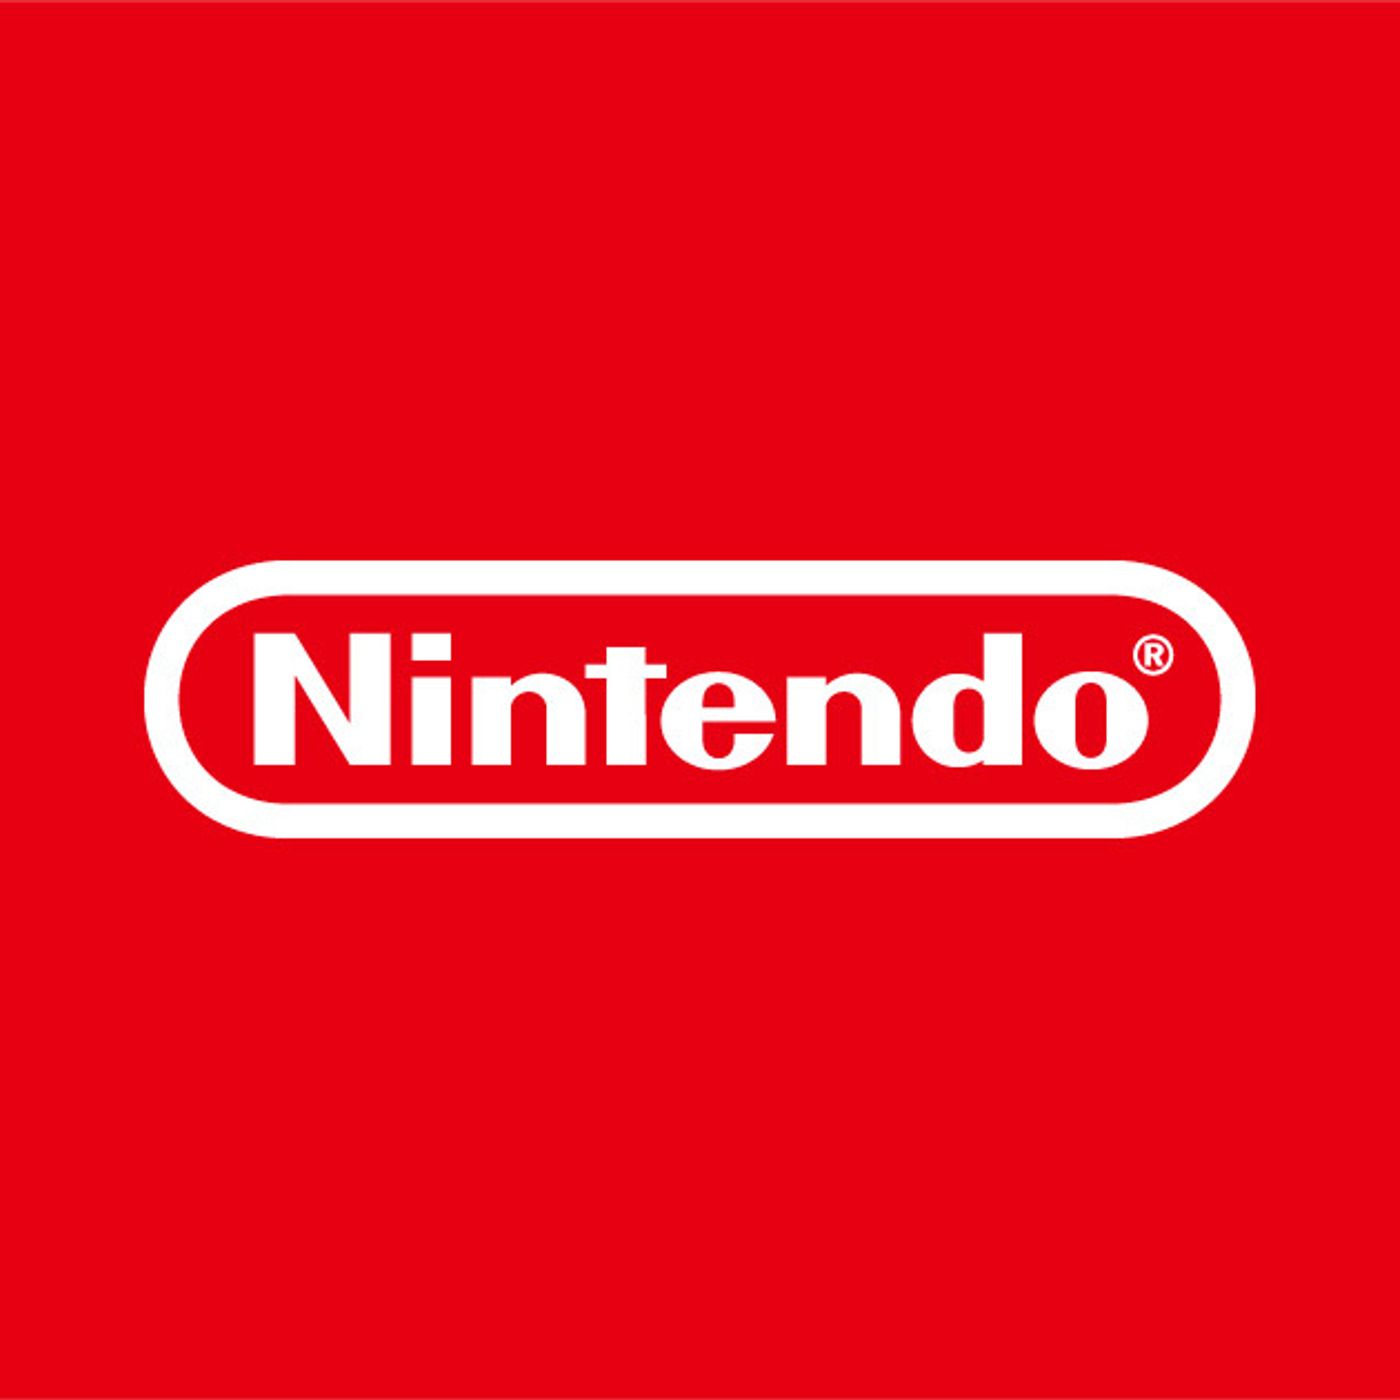 S18 Ep1293: Nintendo's next-gen console will launch in 2024